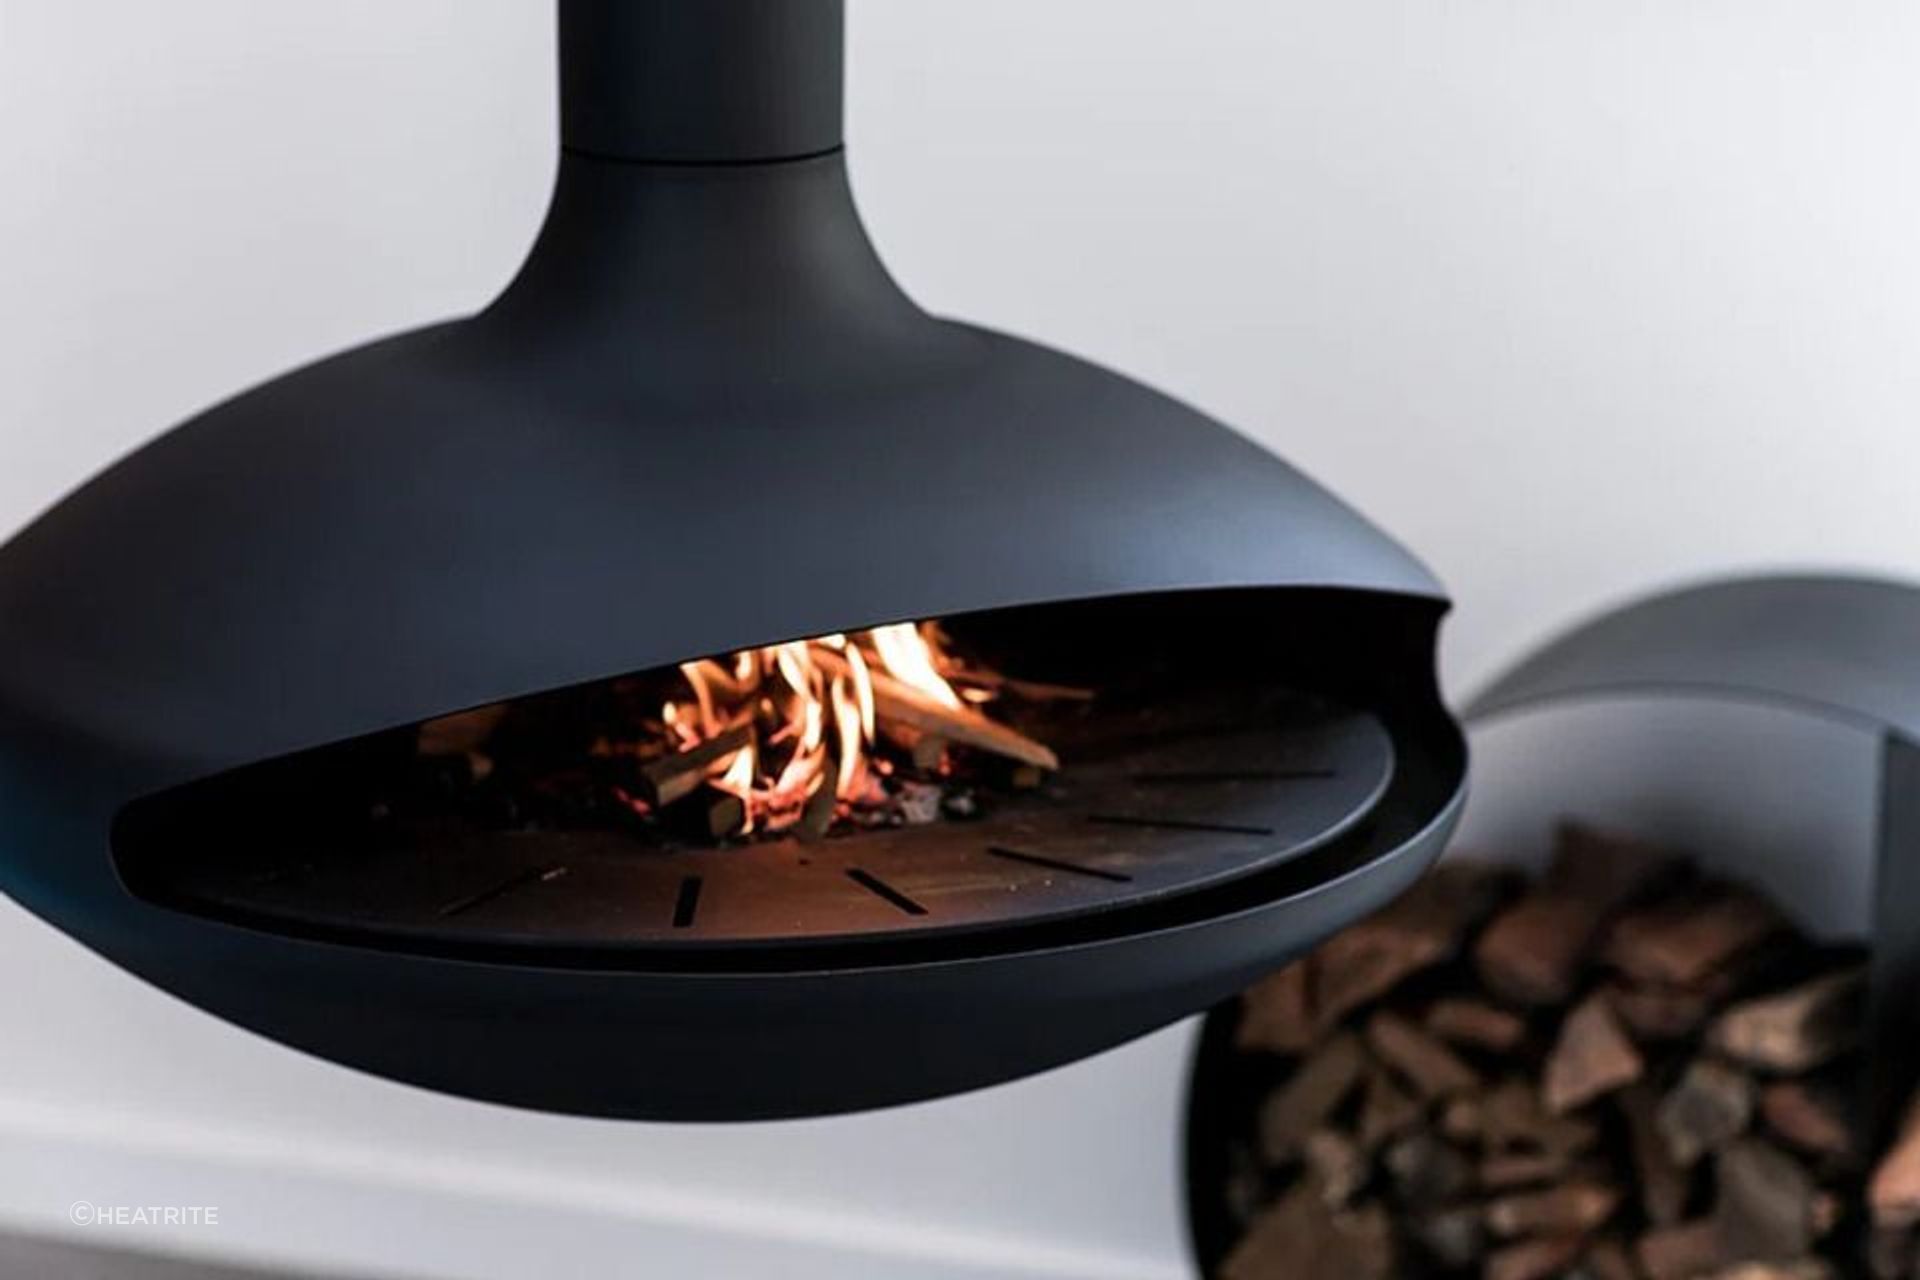 The 'Aether' suspended fireplace doubles up as an indoor pizza oven